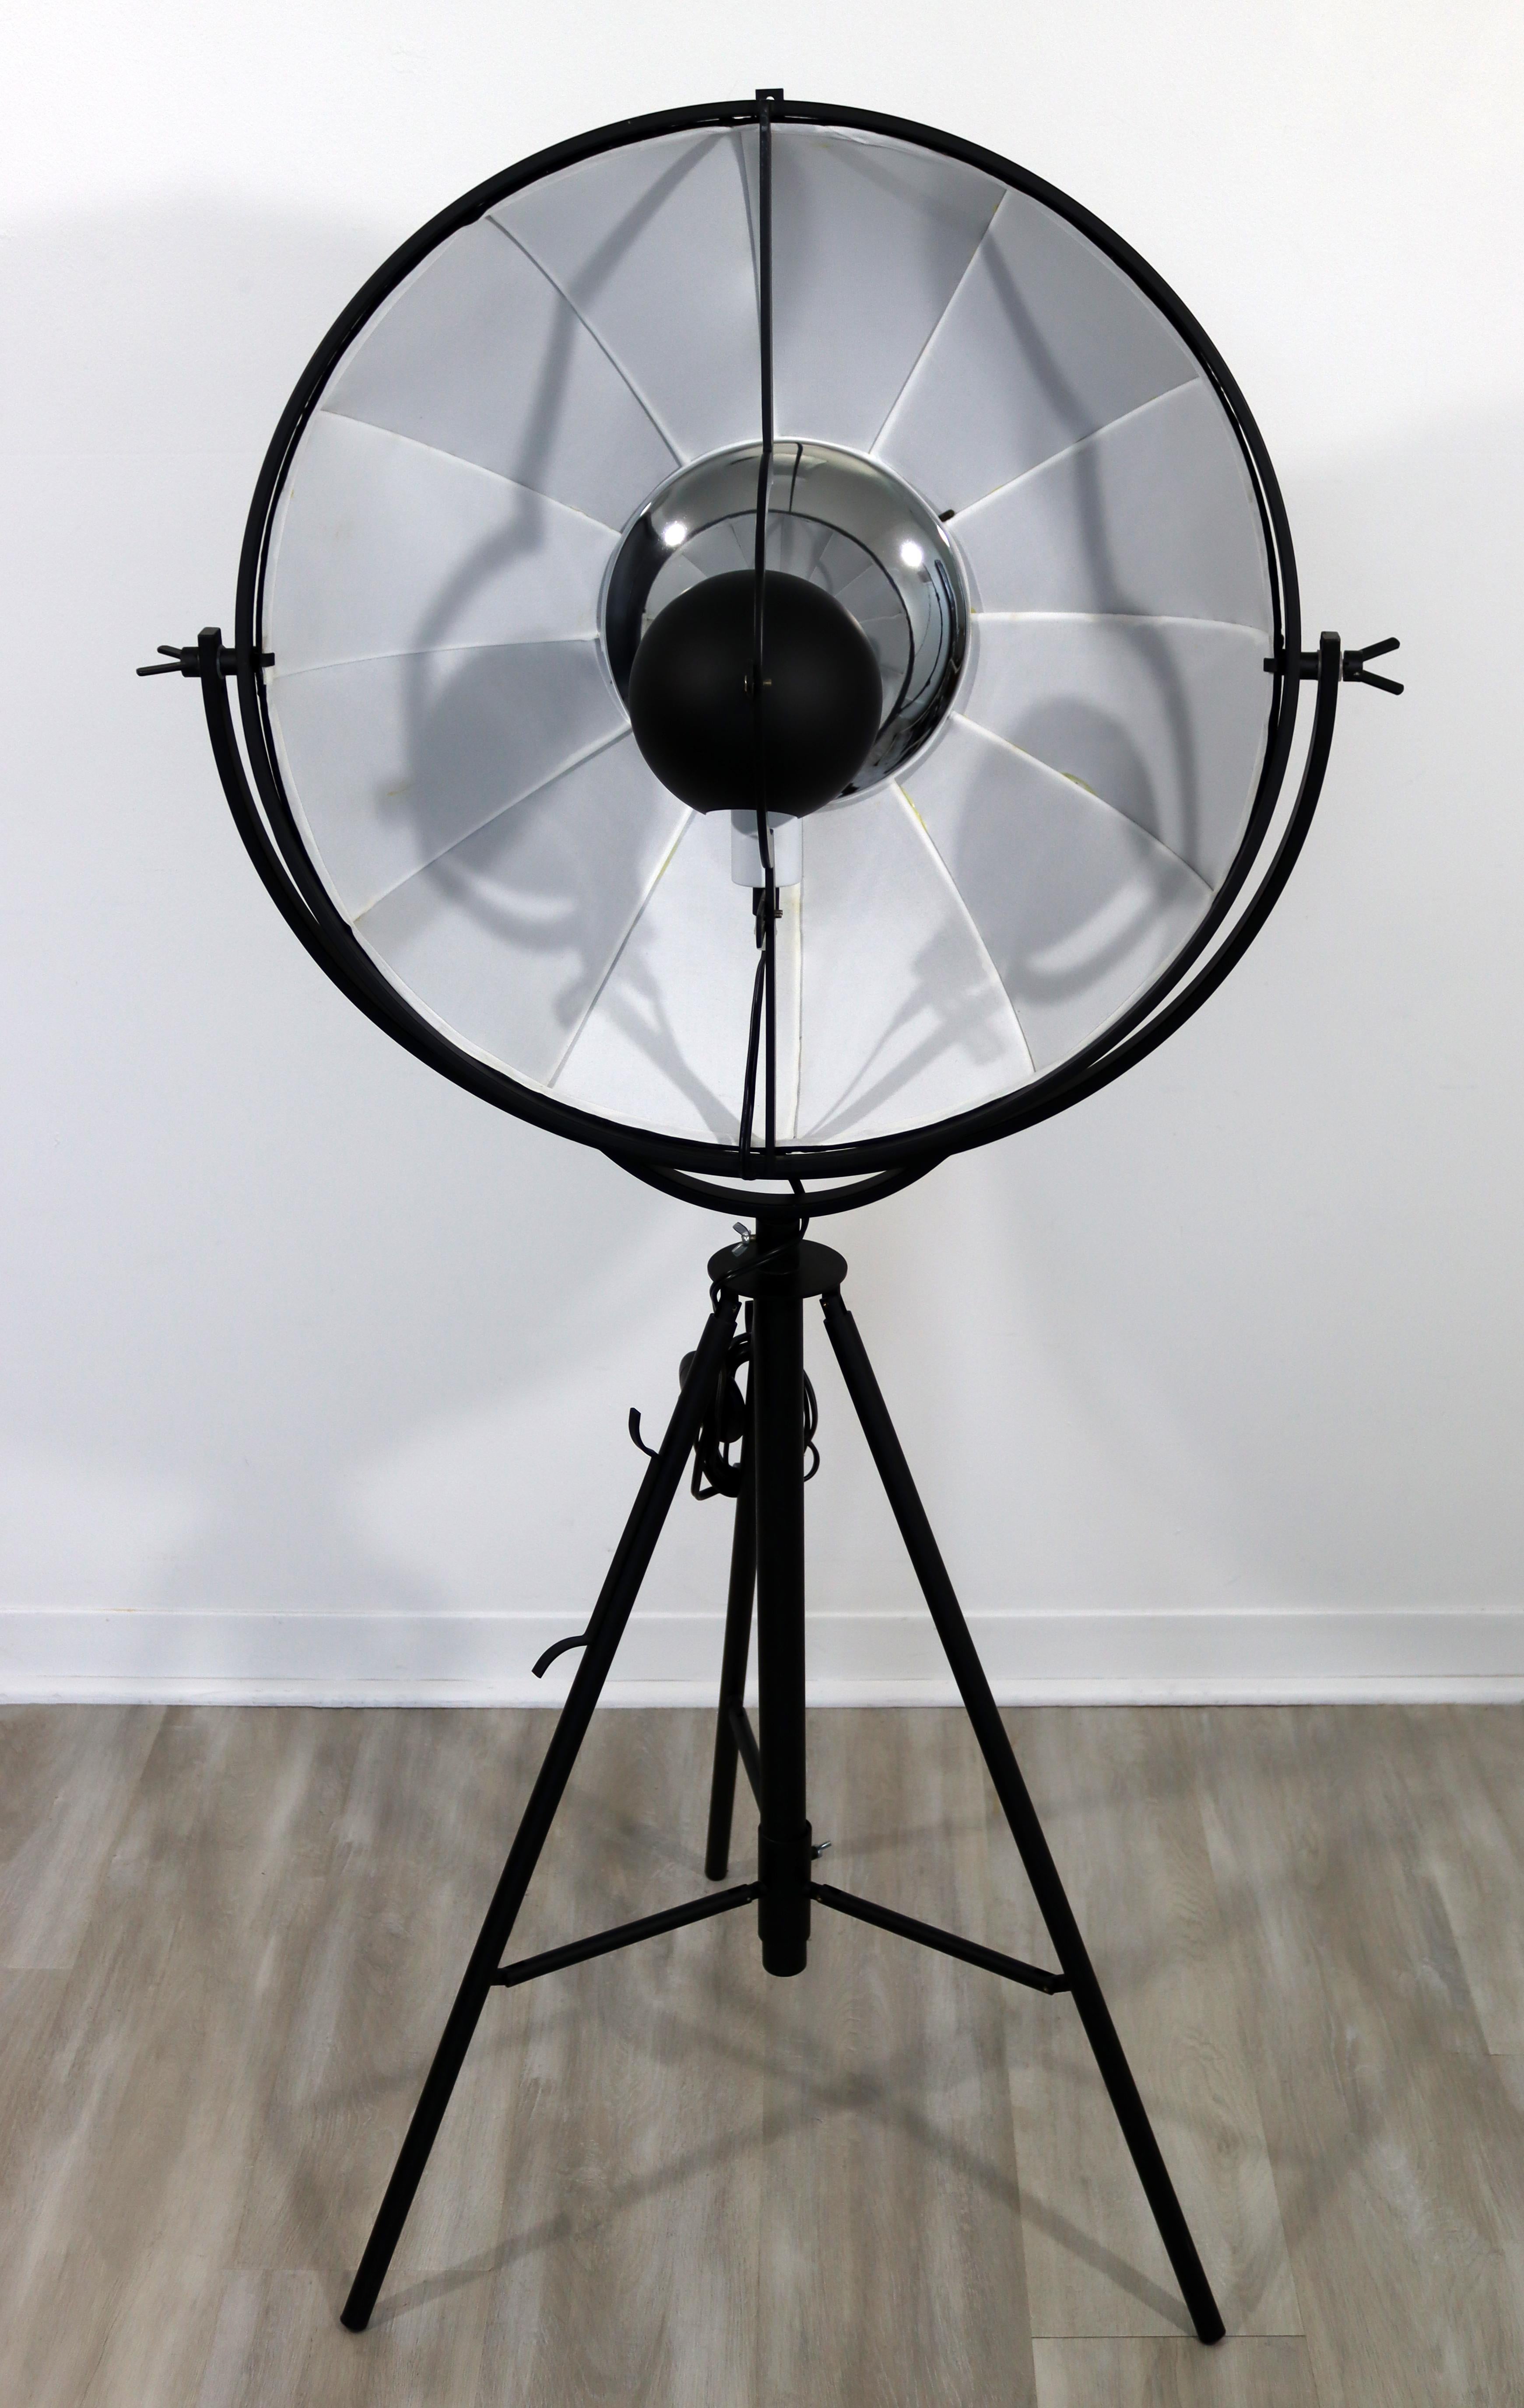 For your consideration is a Mariano Fortuny for Palluco Italia photographer lamp in original black, circa the 1980s. In excellent condition. The dimensions are 28